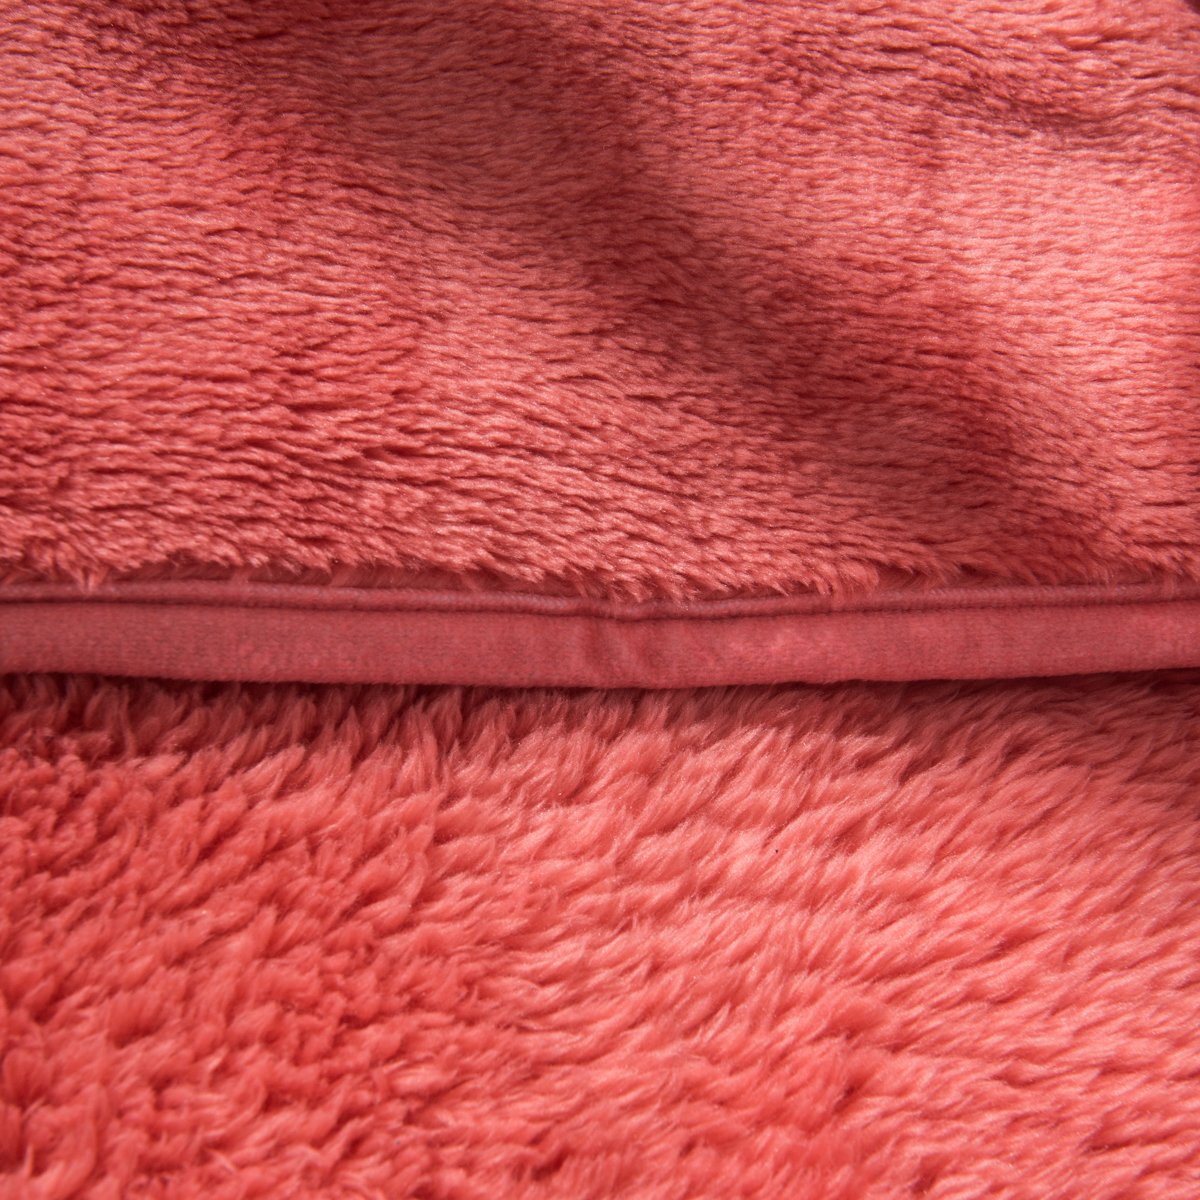 Hyseas Heavy and Thick Blanket, Extra Soft and Plush Bed Blanket (Coral, Queen, 90 x 90 in)